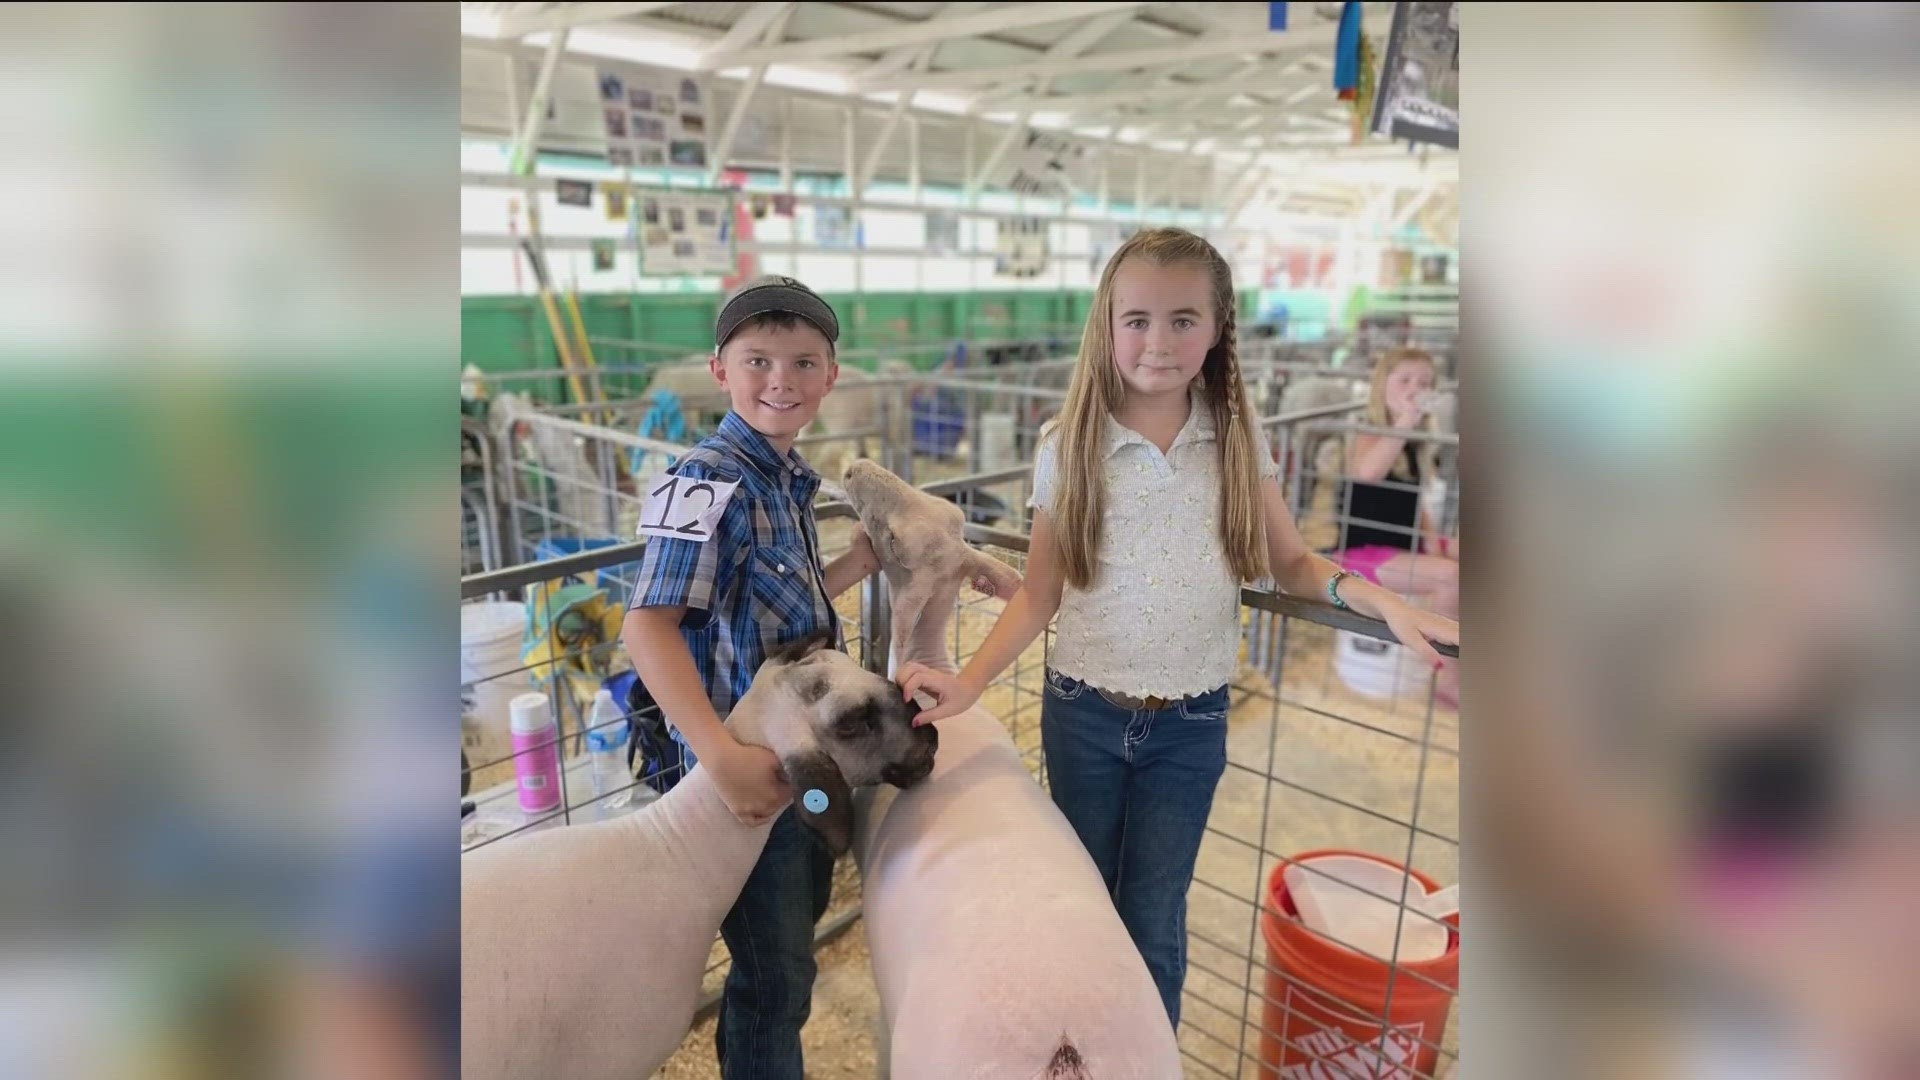 Instead of showing her 4-H sheep at the fair, 9-year-old Makenzie Peters had to have brain surgery. Her best friend and community showed up to support her.